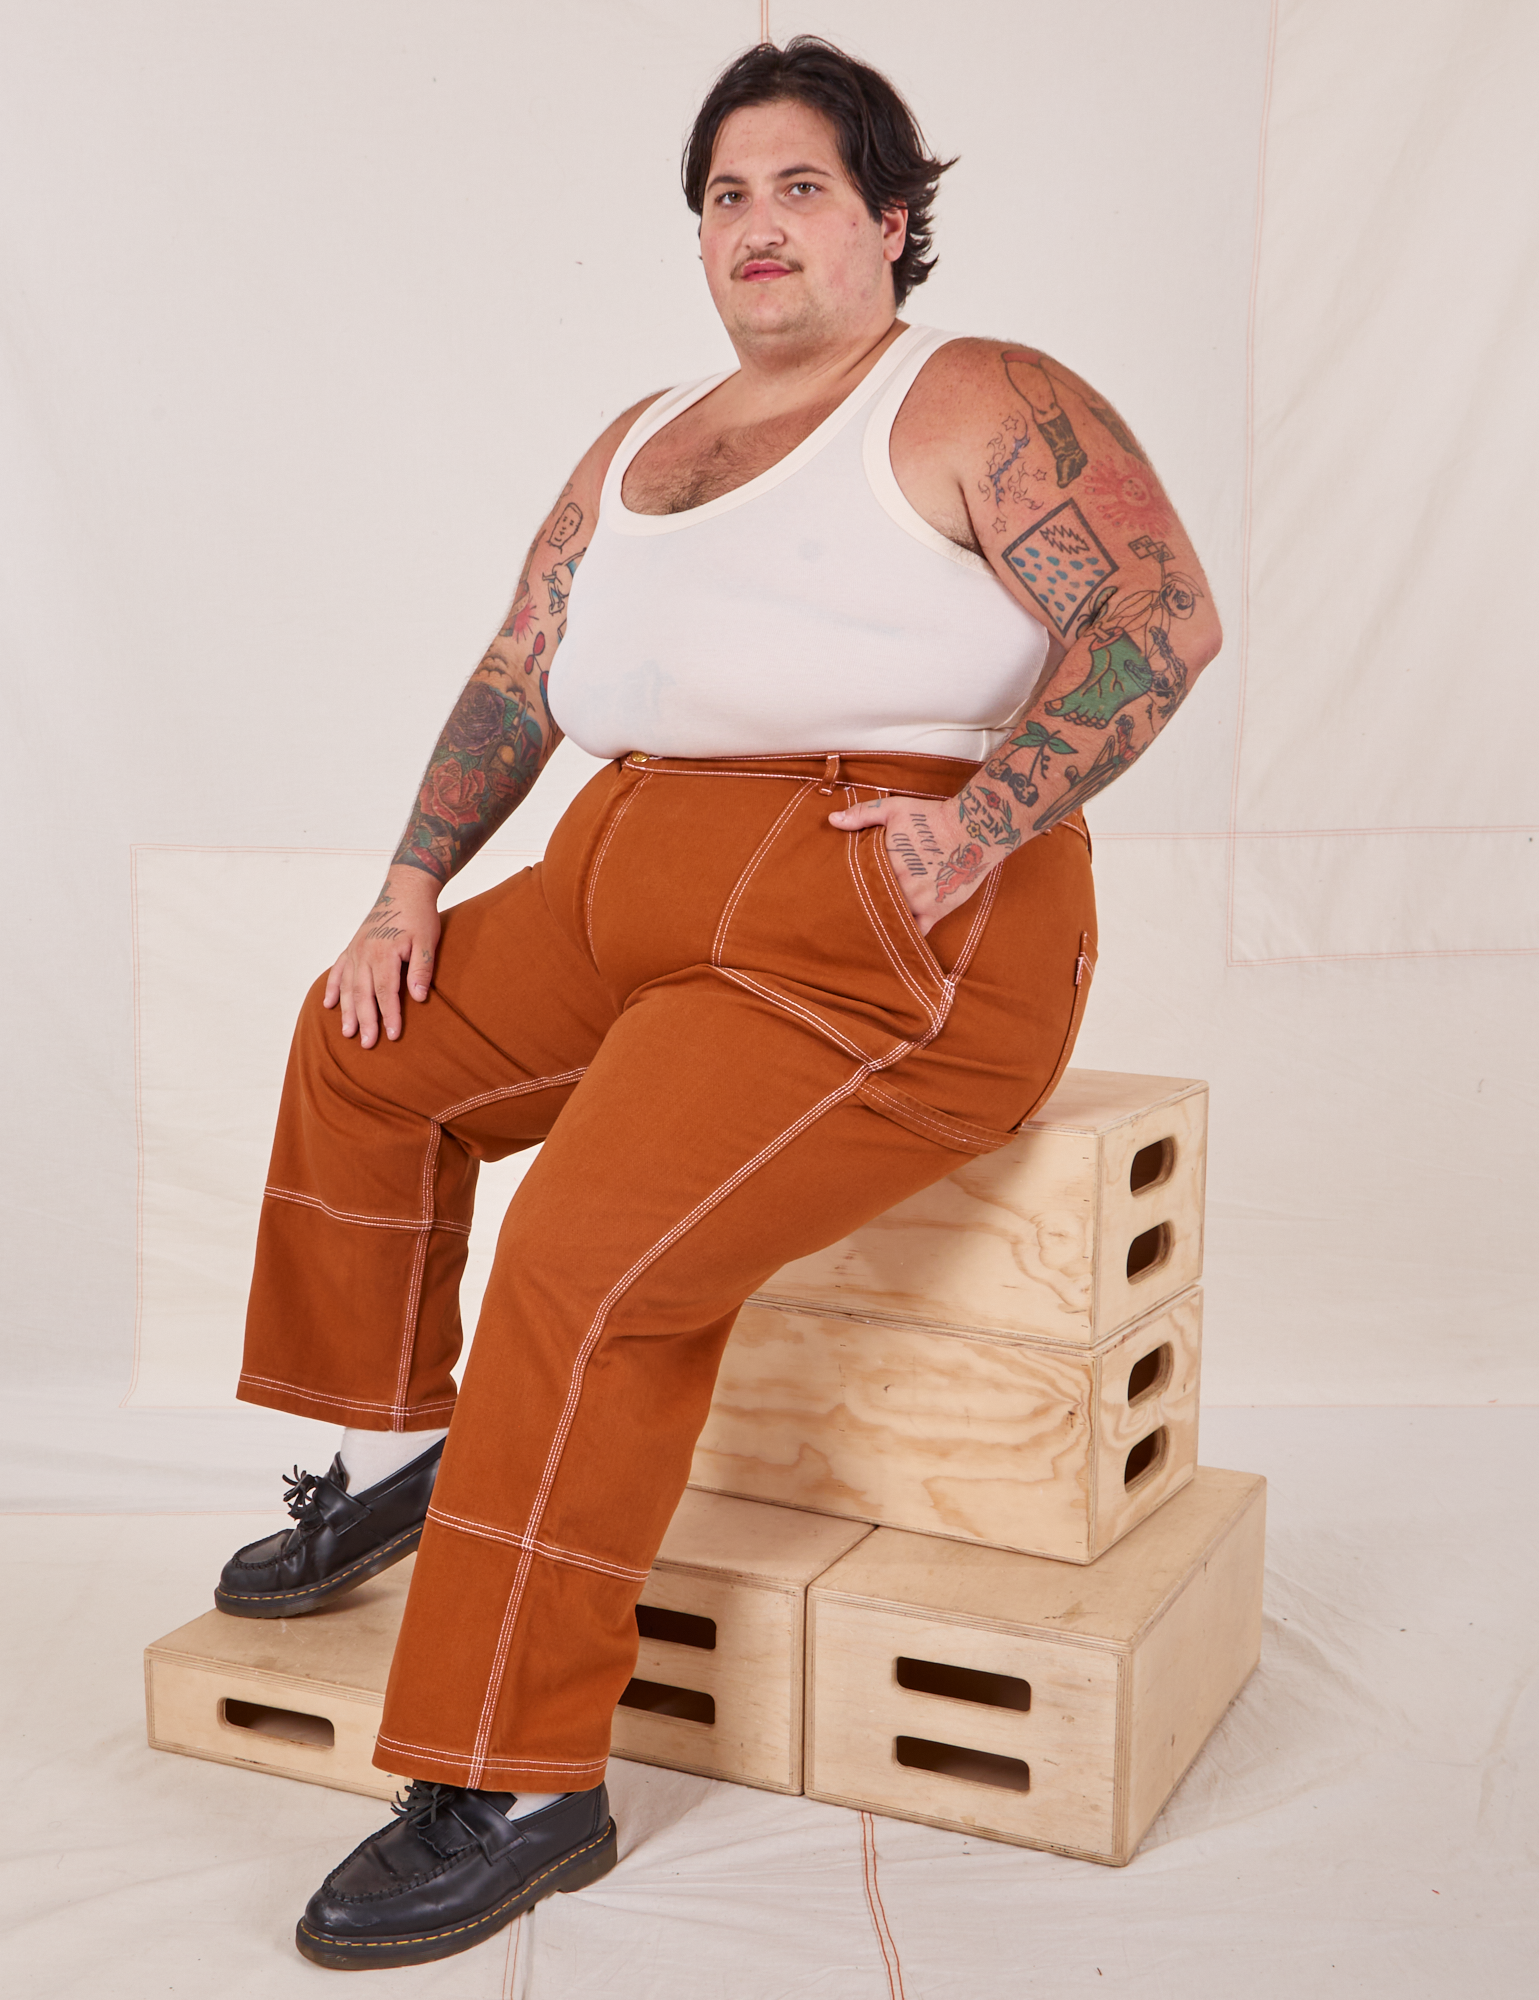 Sam is wearing Carpenter Jeans in Burnt Terracotta and vintage off-white Cropped Tank Top. They are sitting on a stack of wooden crates.